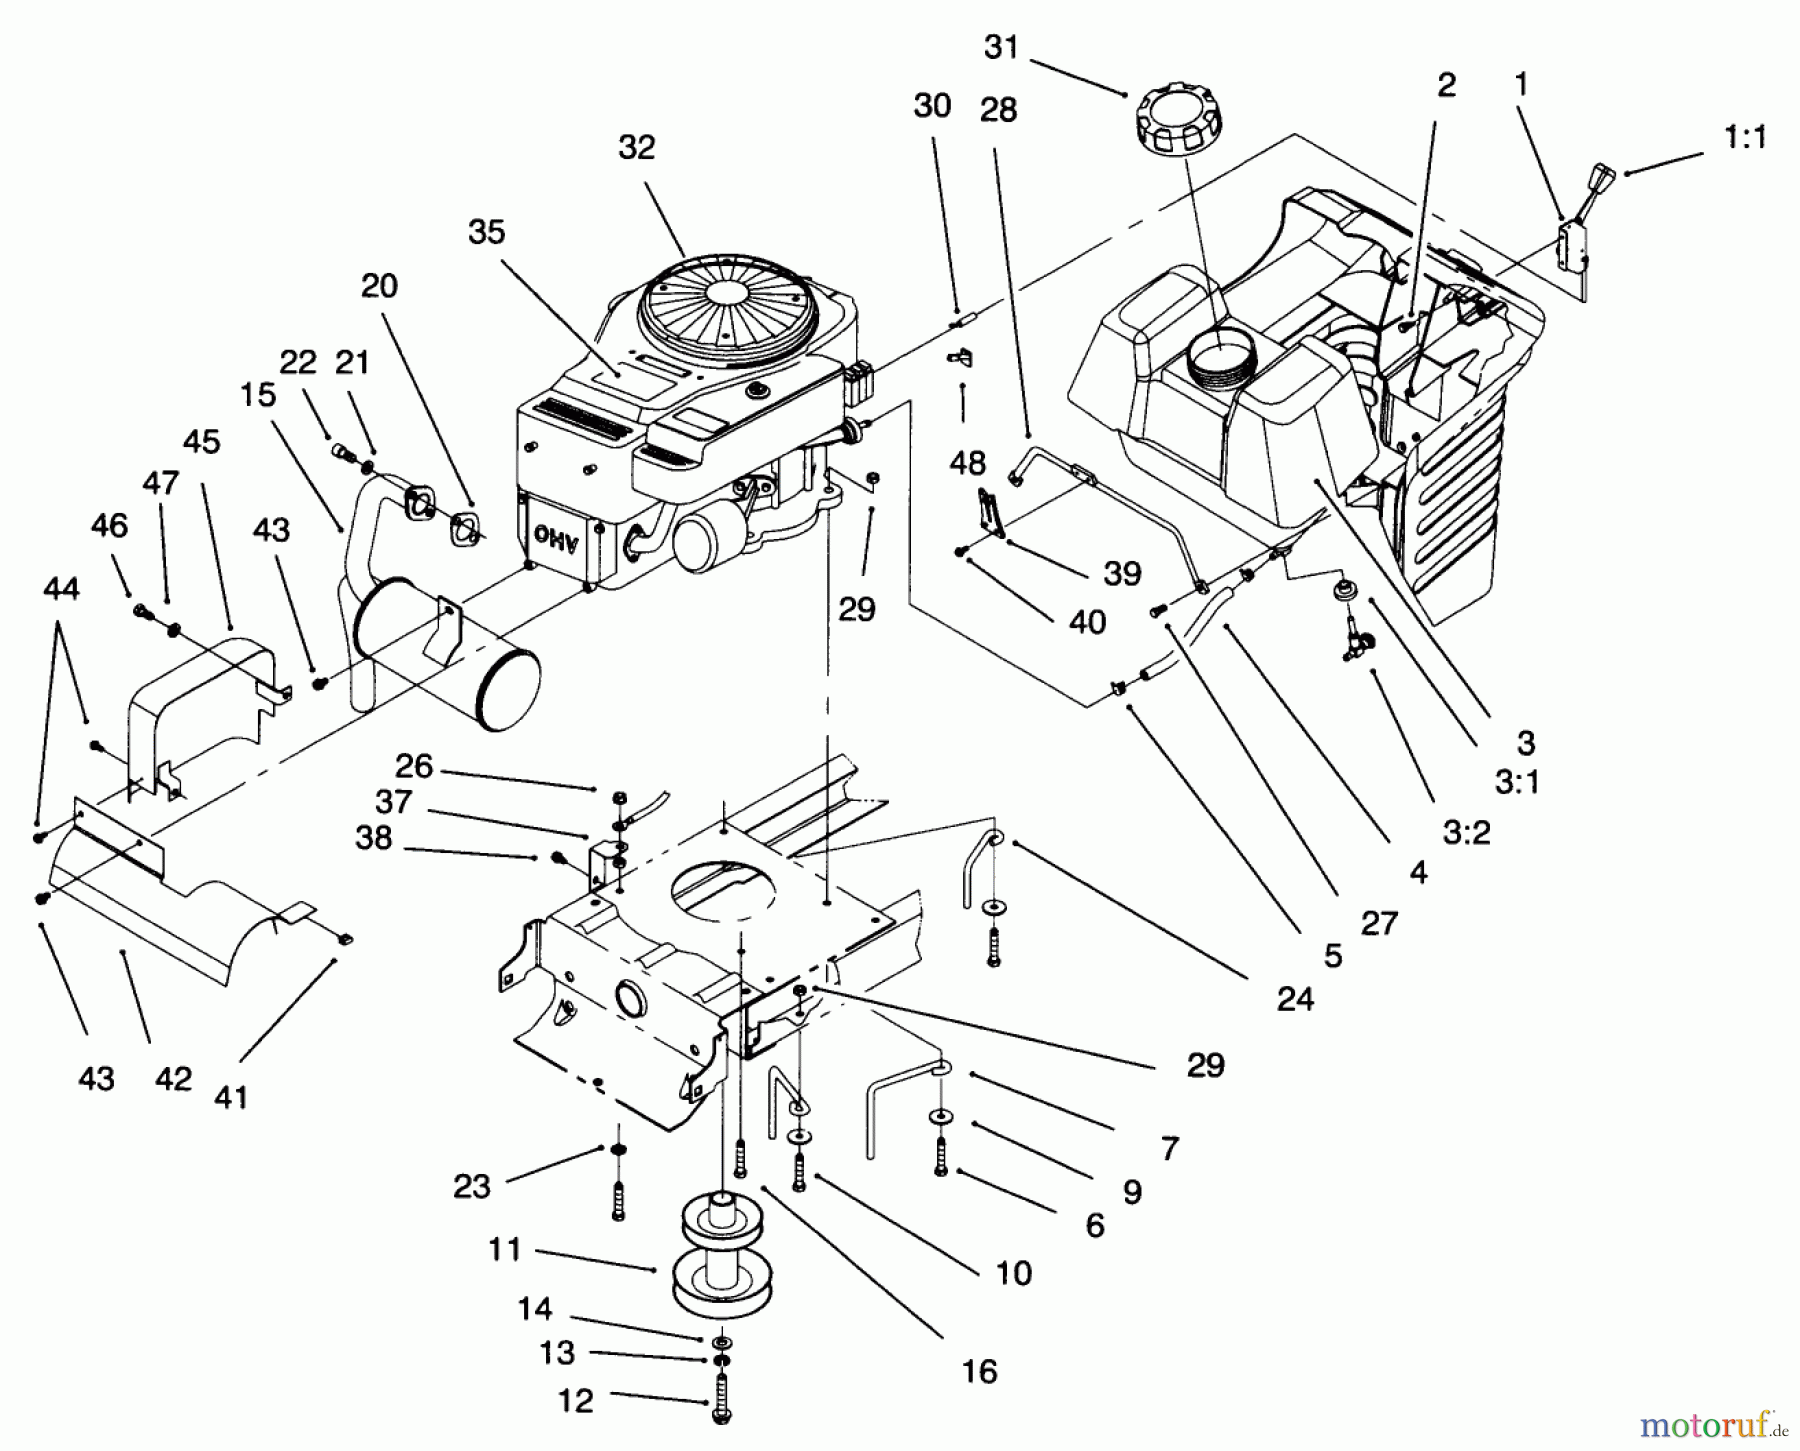  Toro Neu Mowers, Lawn & Garden Tractor Seite 1 71217 (14-38HXL) - Toro 14-38HXL Lawn Tractor, 1996 (6900001-6999999) ENGINE SYSTEM COMPONENTS ASSEMBLY